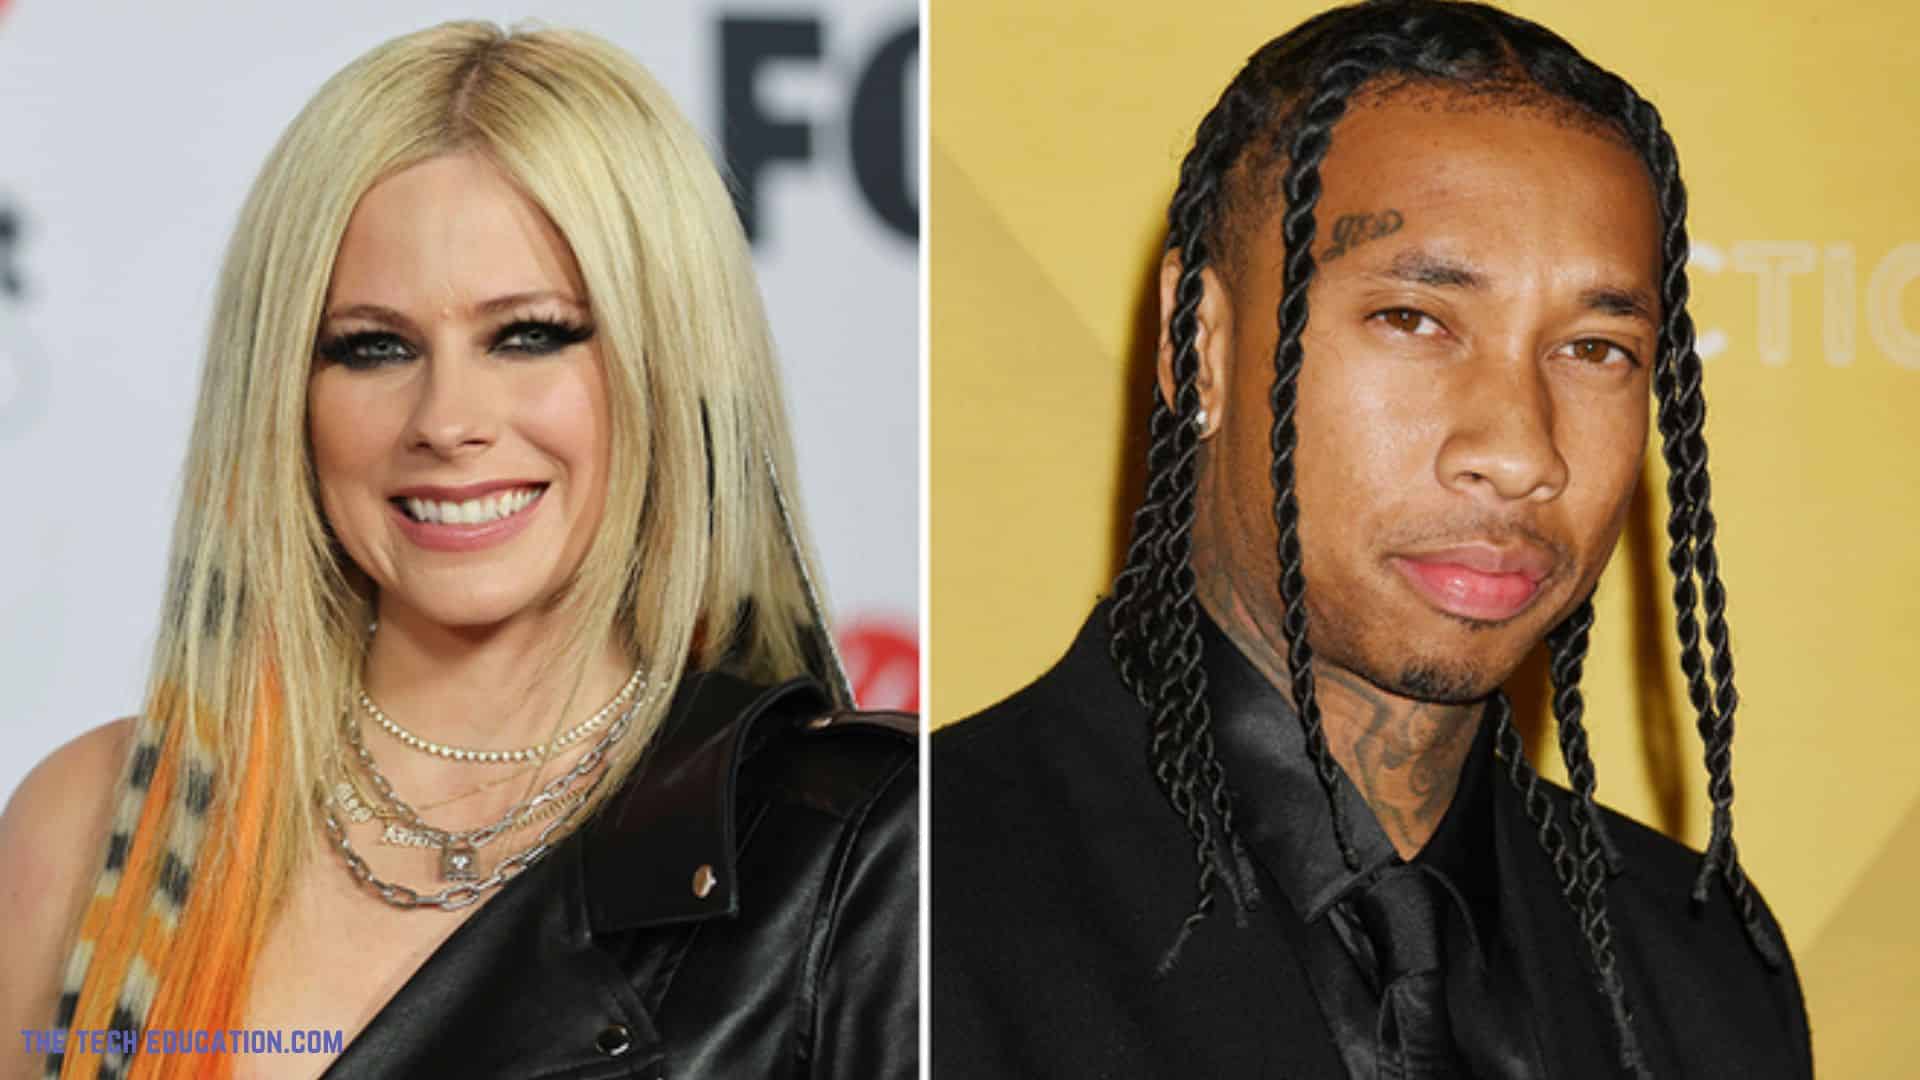 Does Avril Lavigne Dating Tyga? Debunking The Dating Rumors!